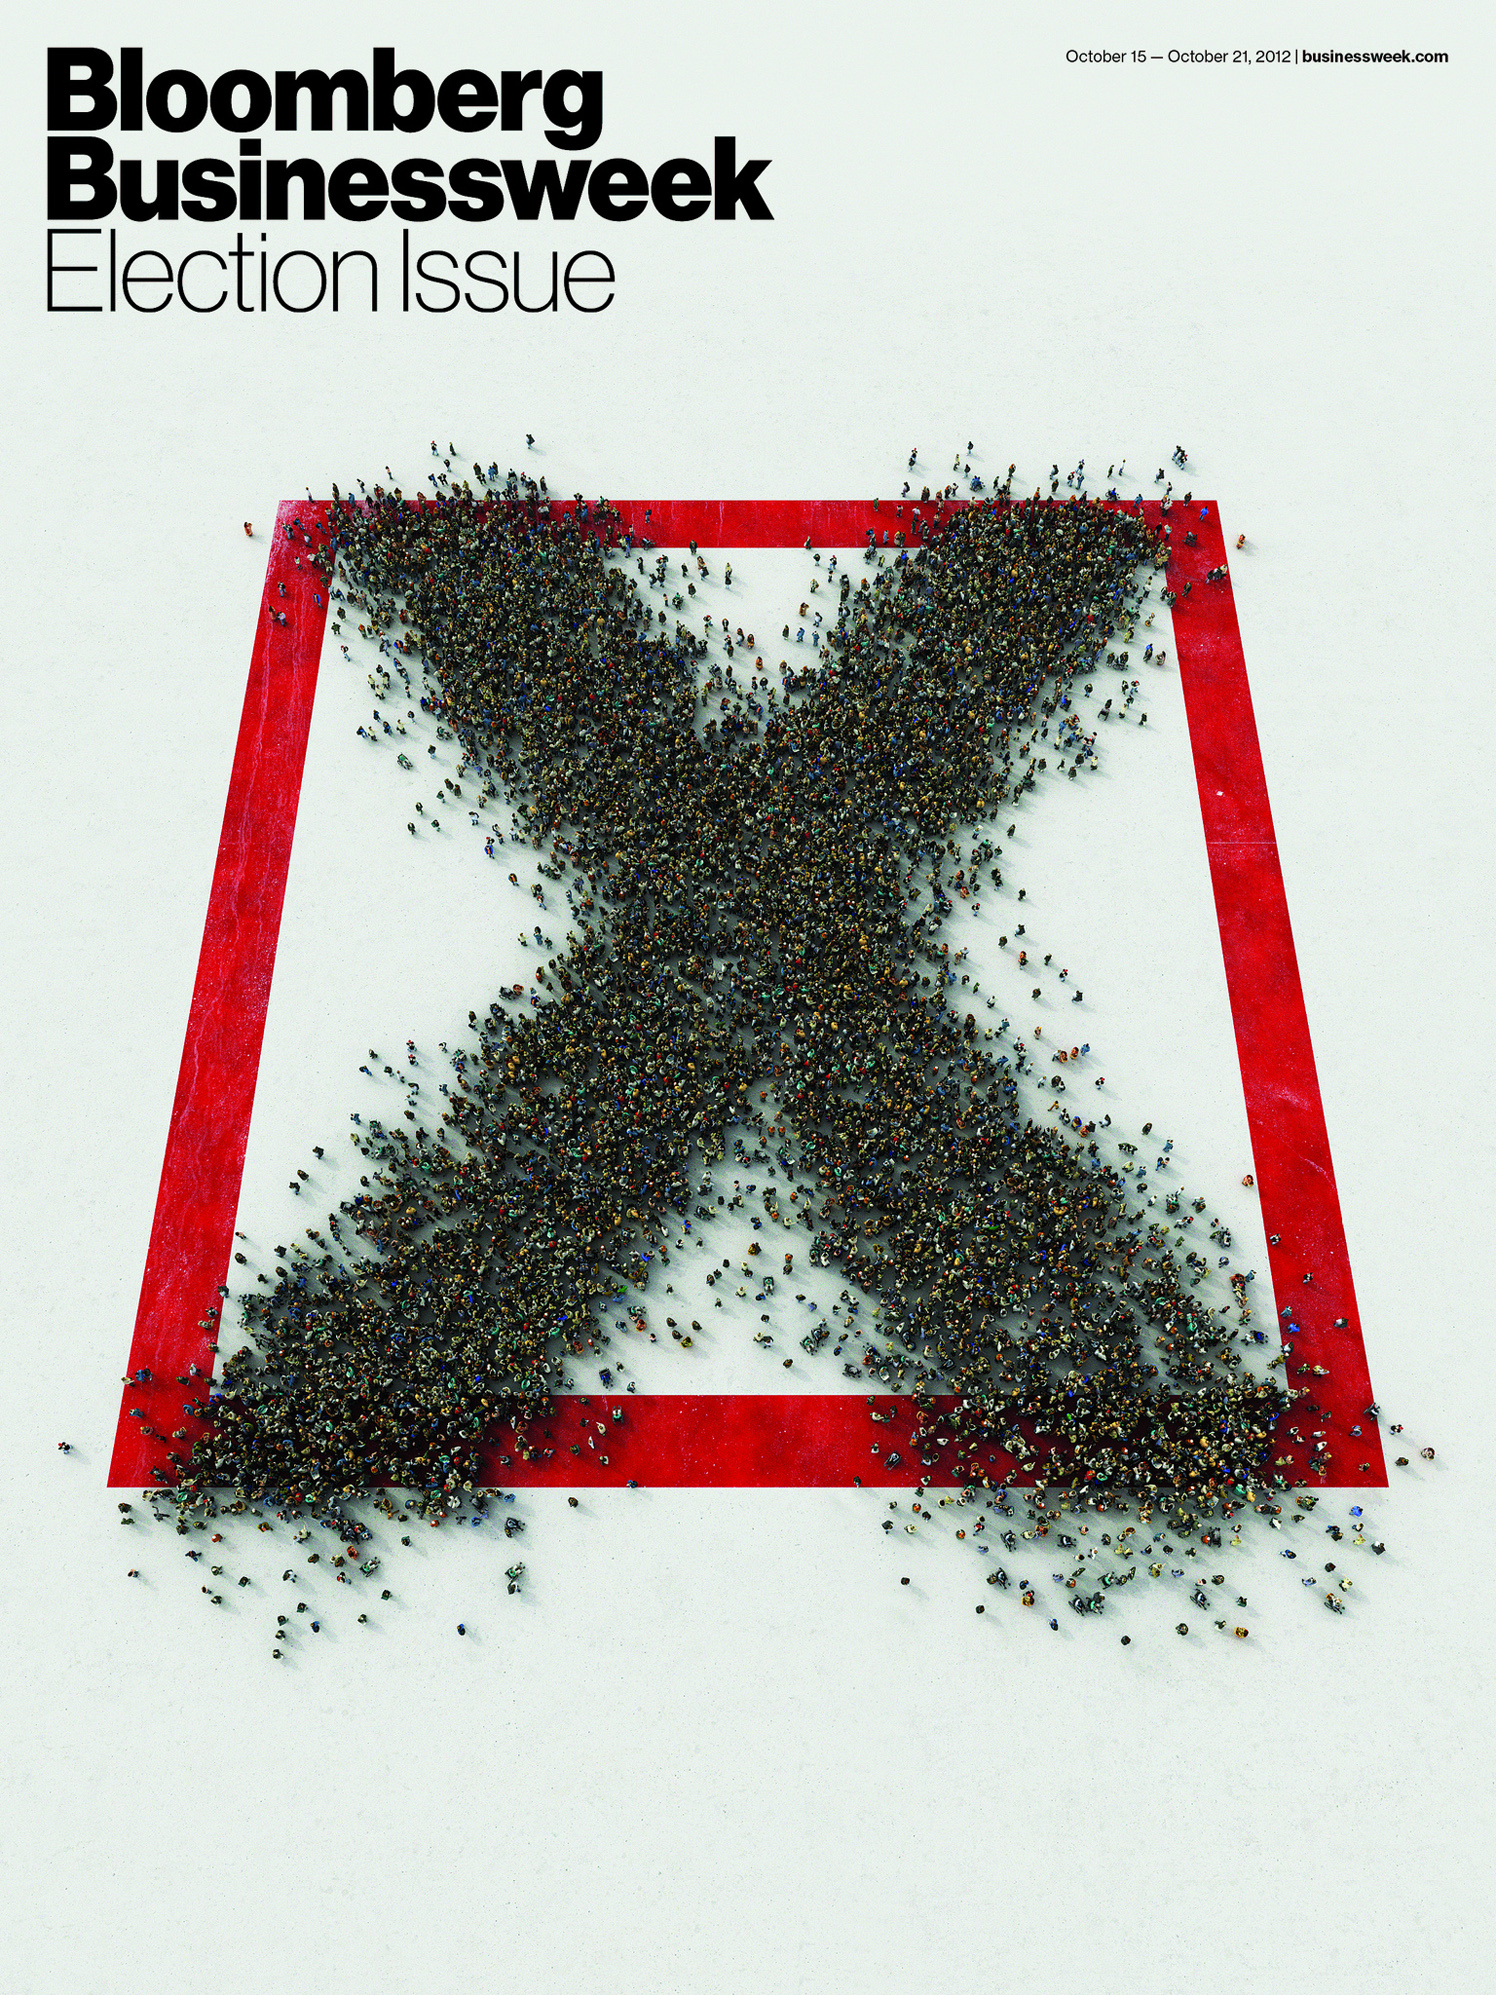 The Election Issue / Bloomberg Businessweek